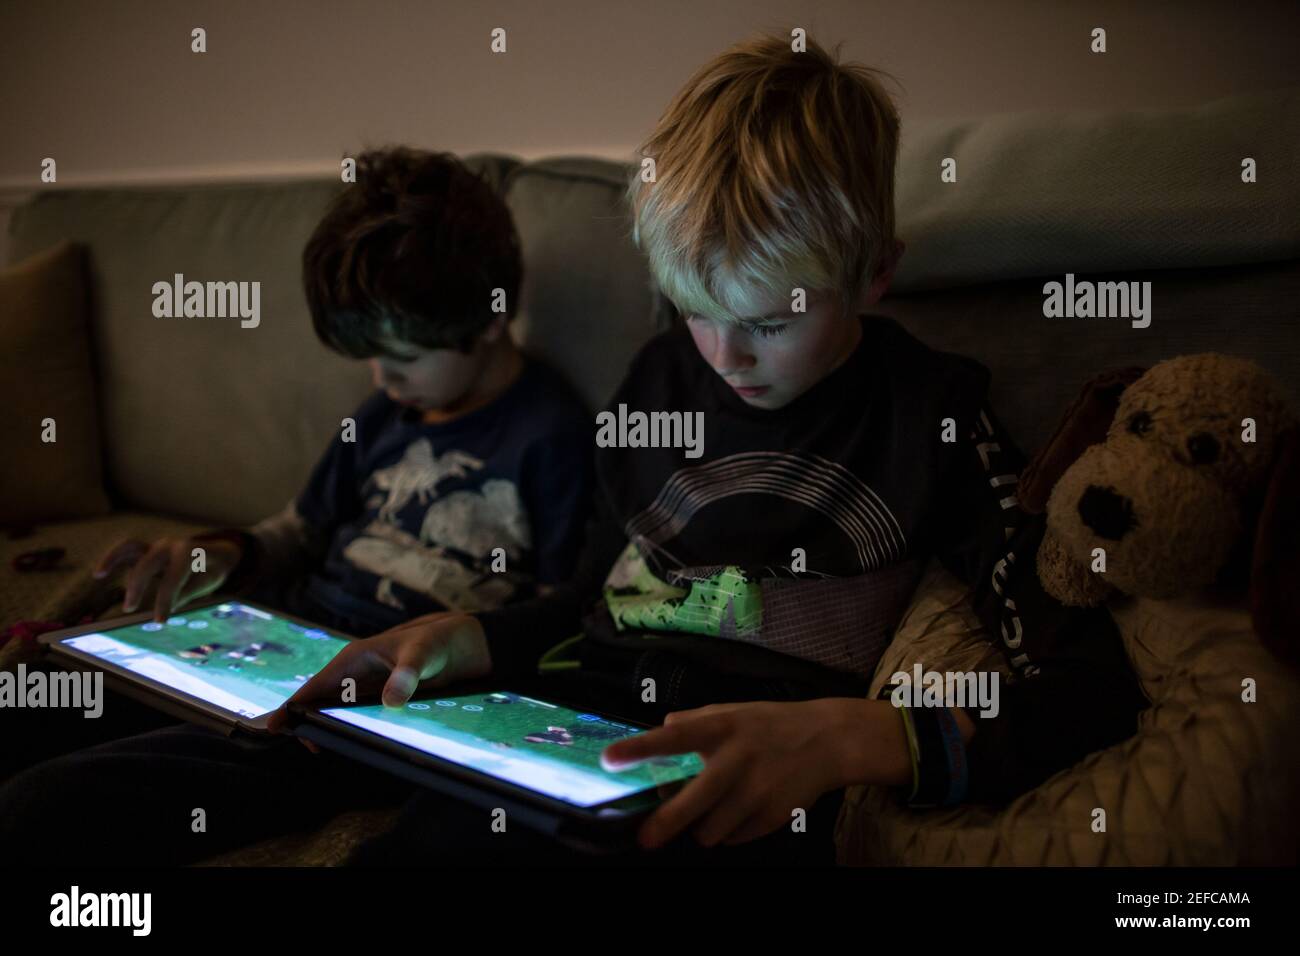 Boys playing 'Roblox' on their iPad tablets at home during school closure due to the coronavirus lockdown restrictions, England, United Kingdom Stock Photo